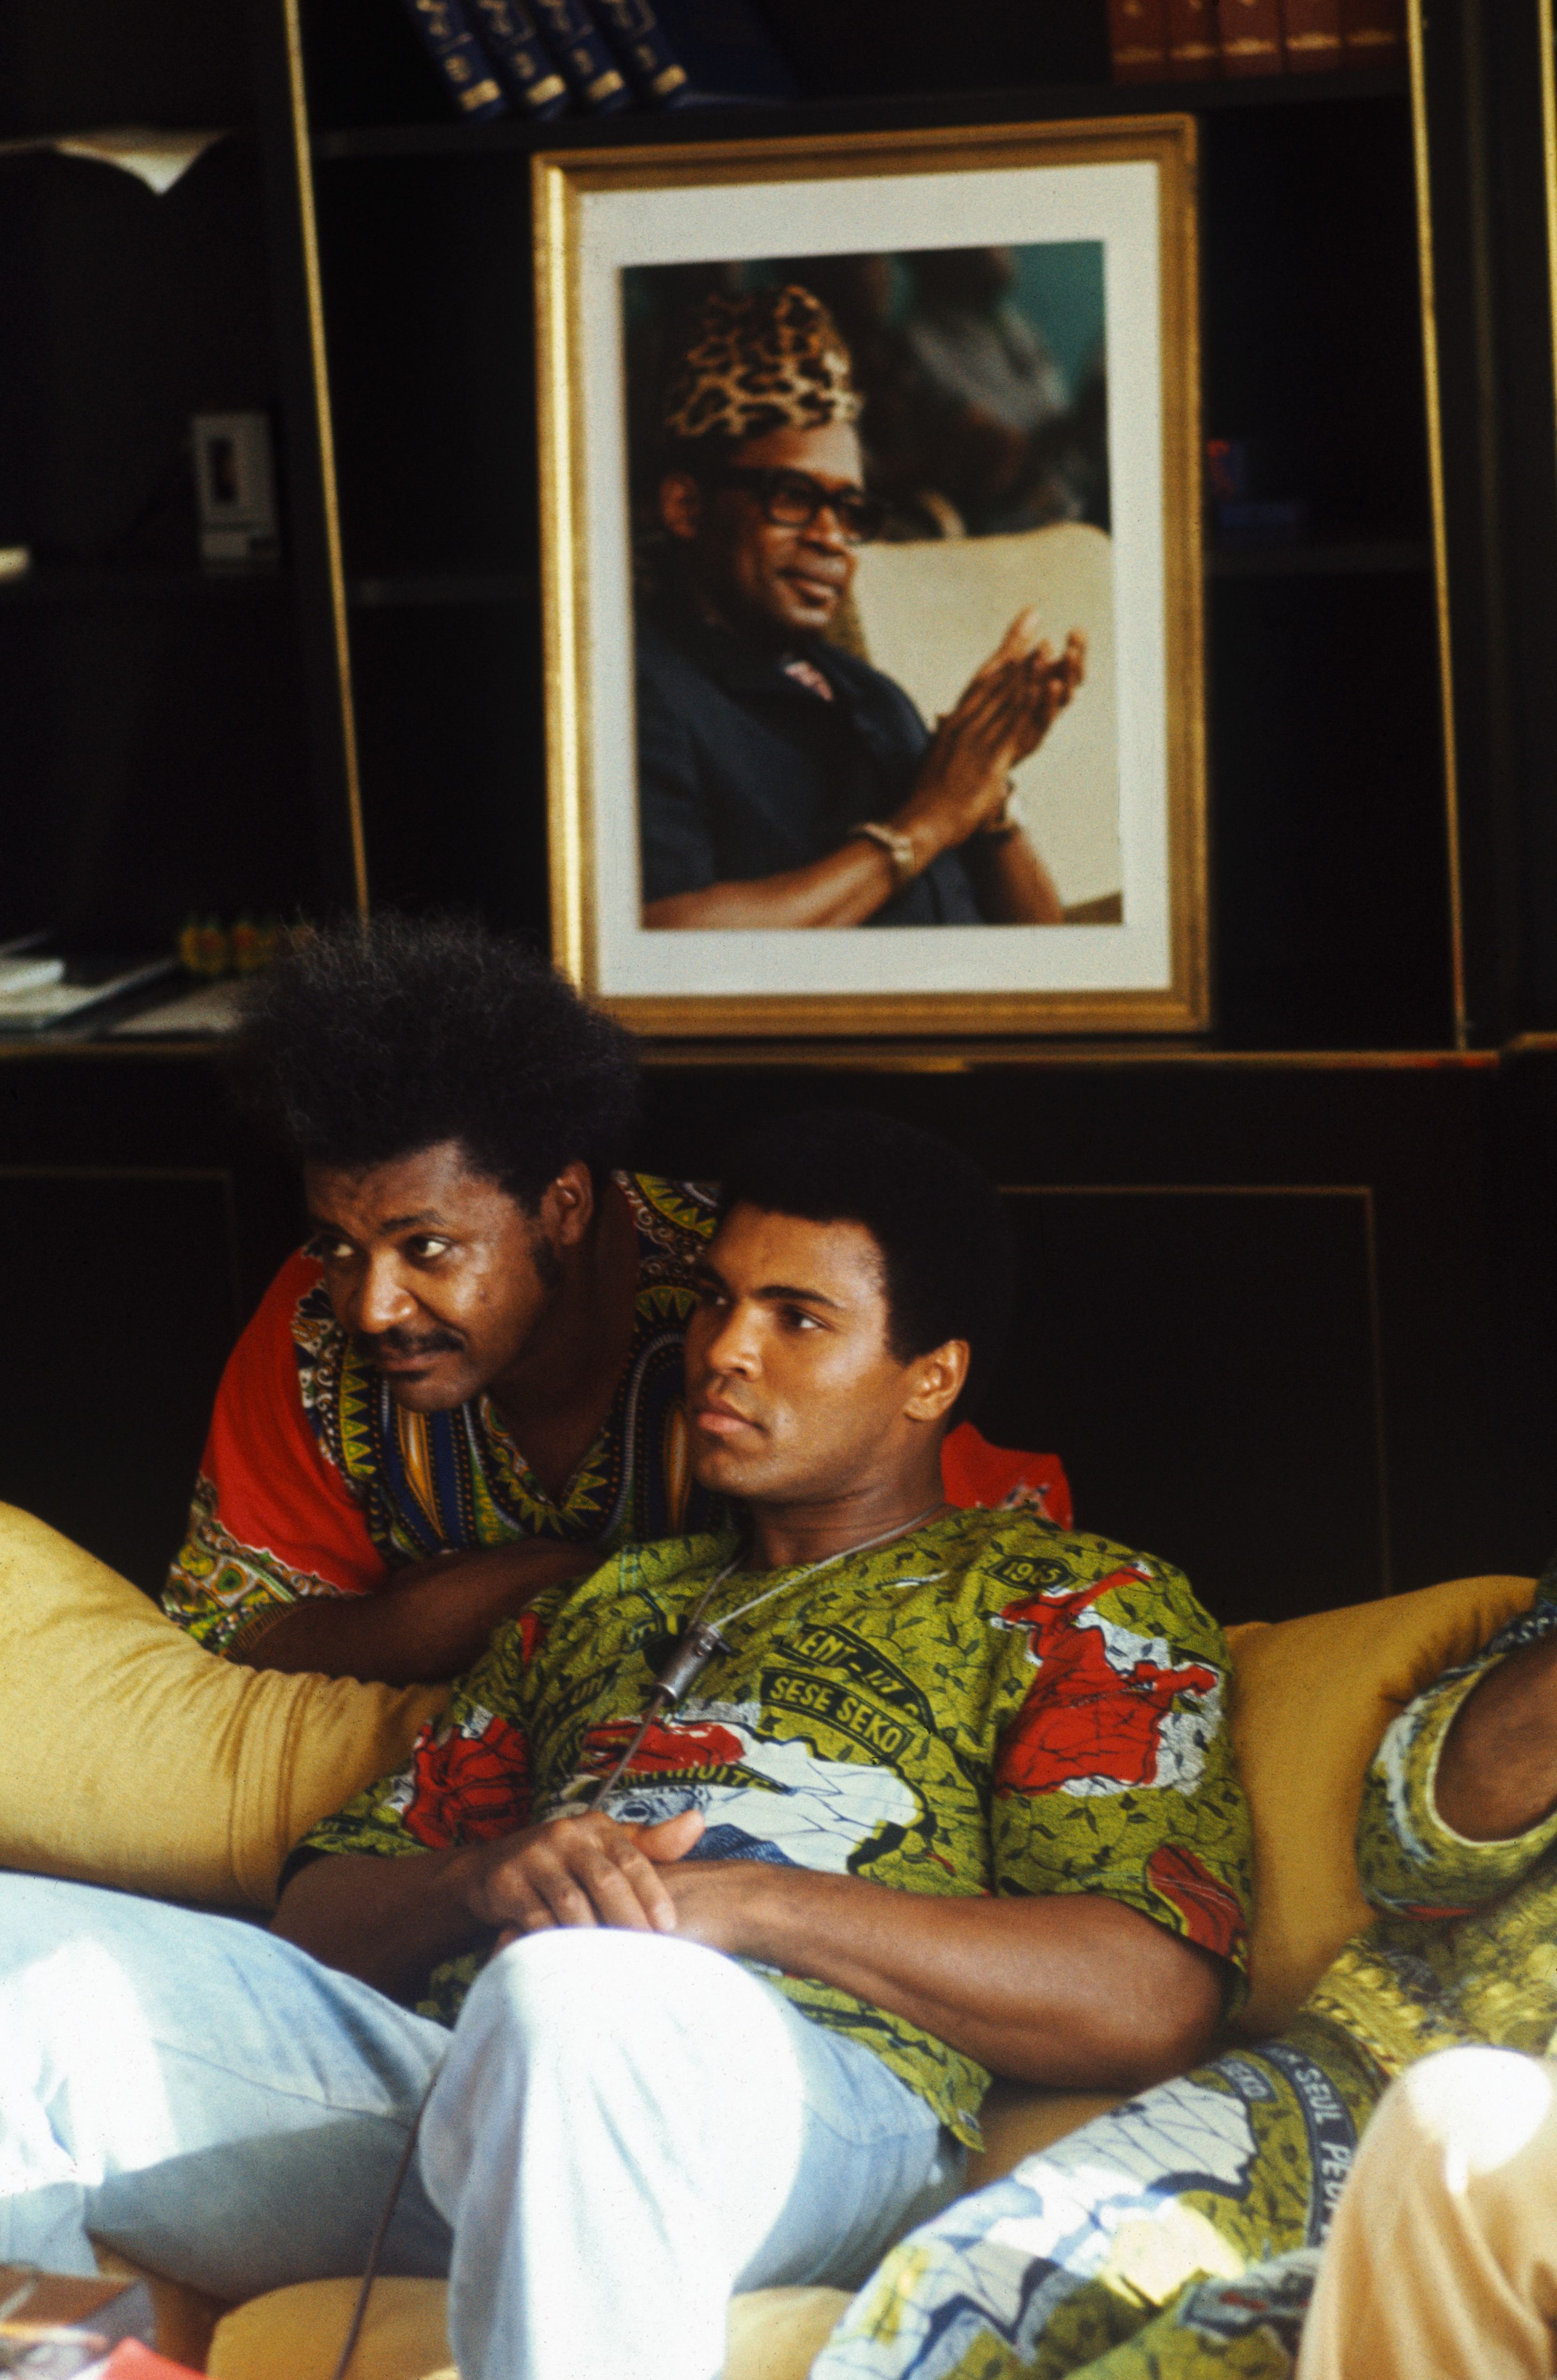 Muhammad Ali and fight promoter Don King in Ali's villa with a portrait of Zaire president Mobutu Sese Seko on the wall behind them.